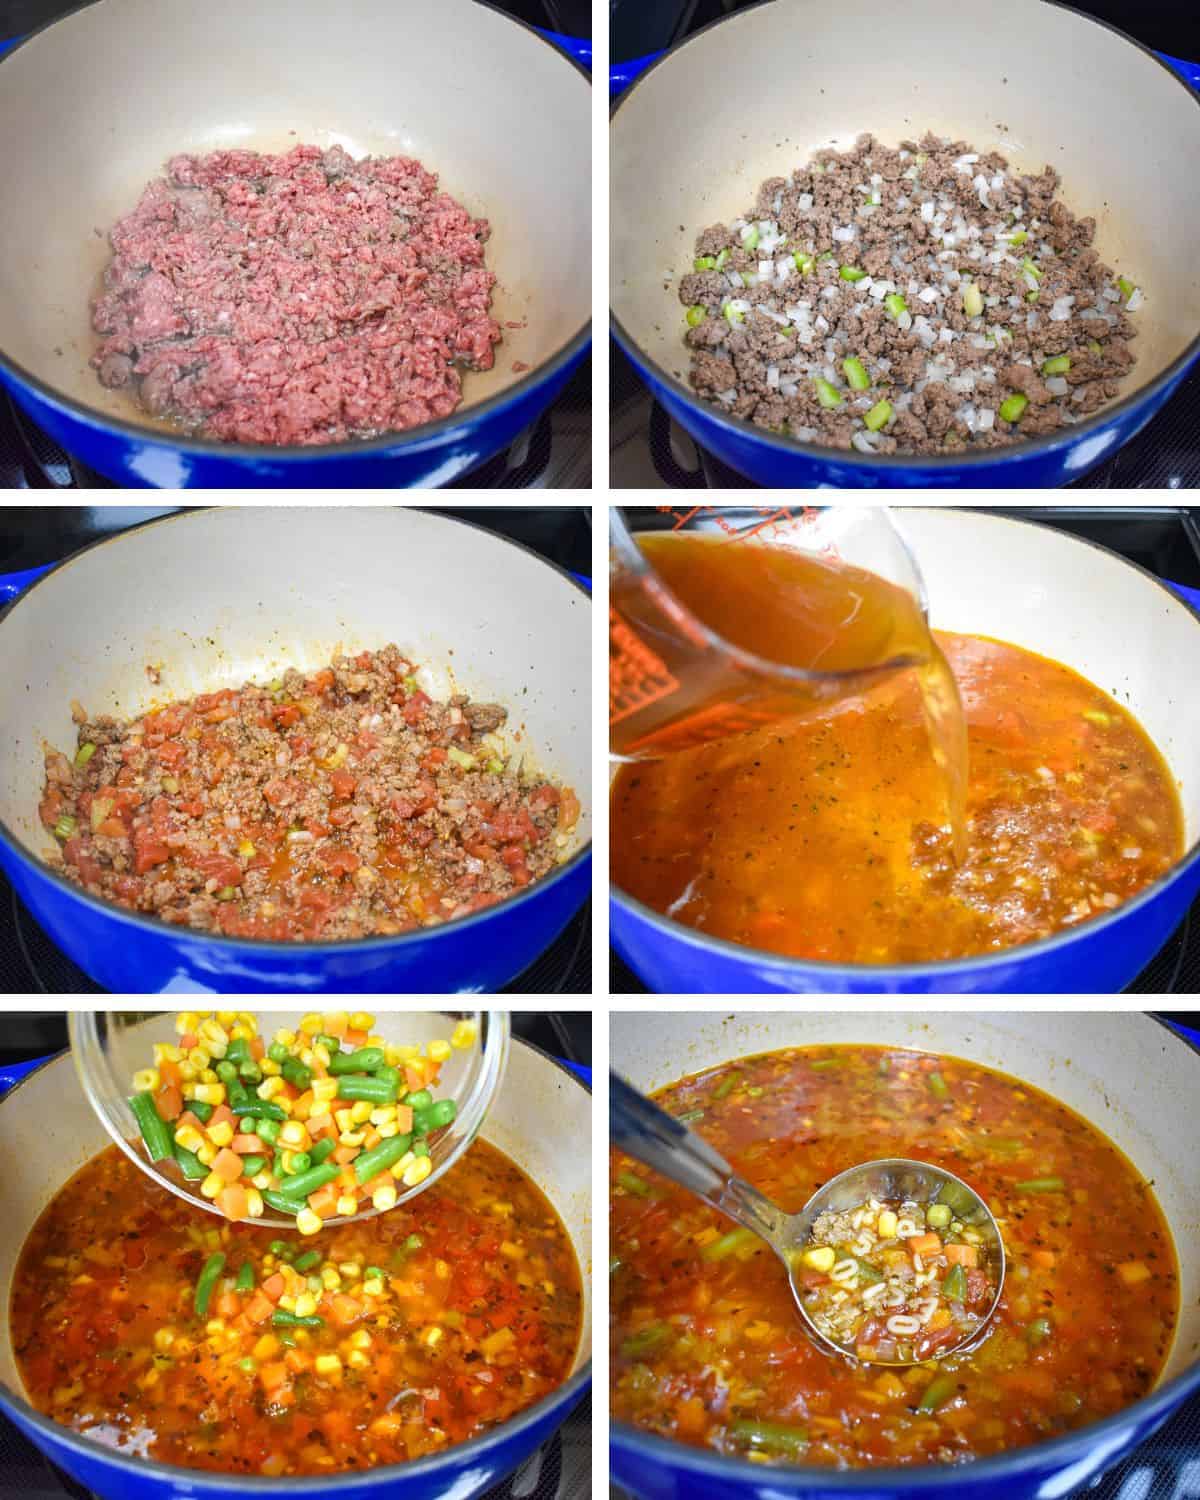 A collage of six images showing the progress of making the alphabet soup.